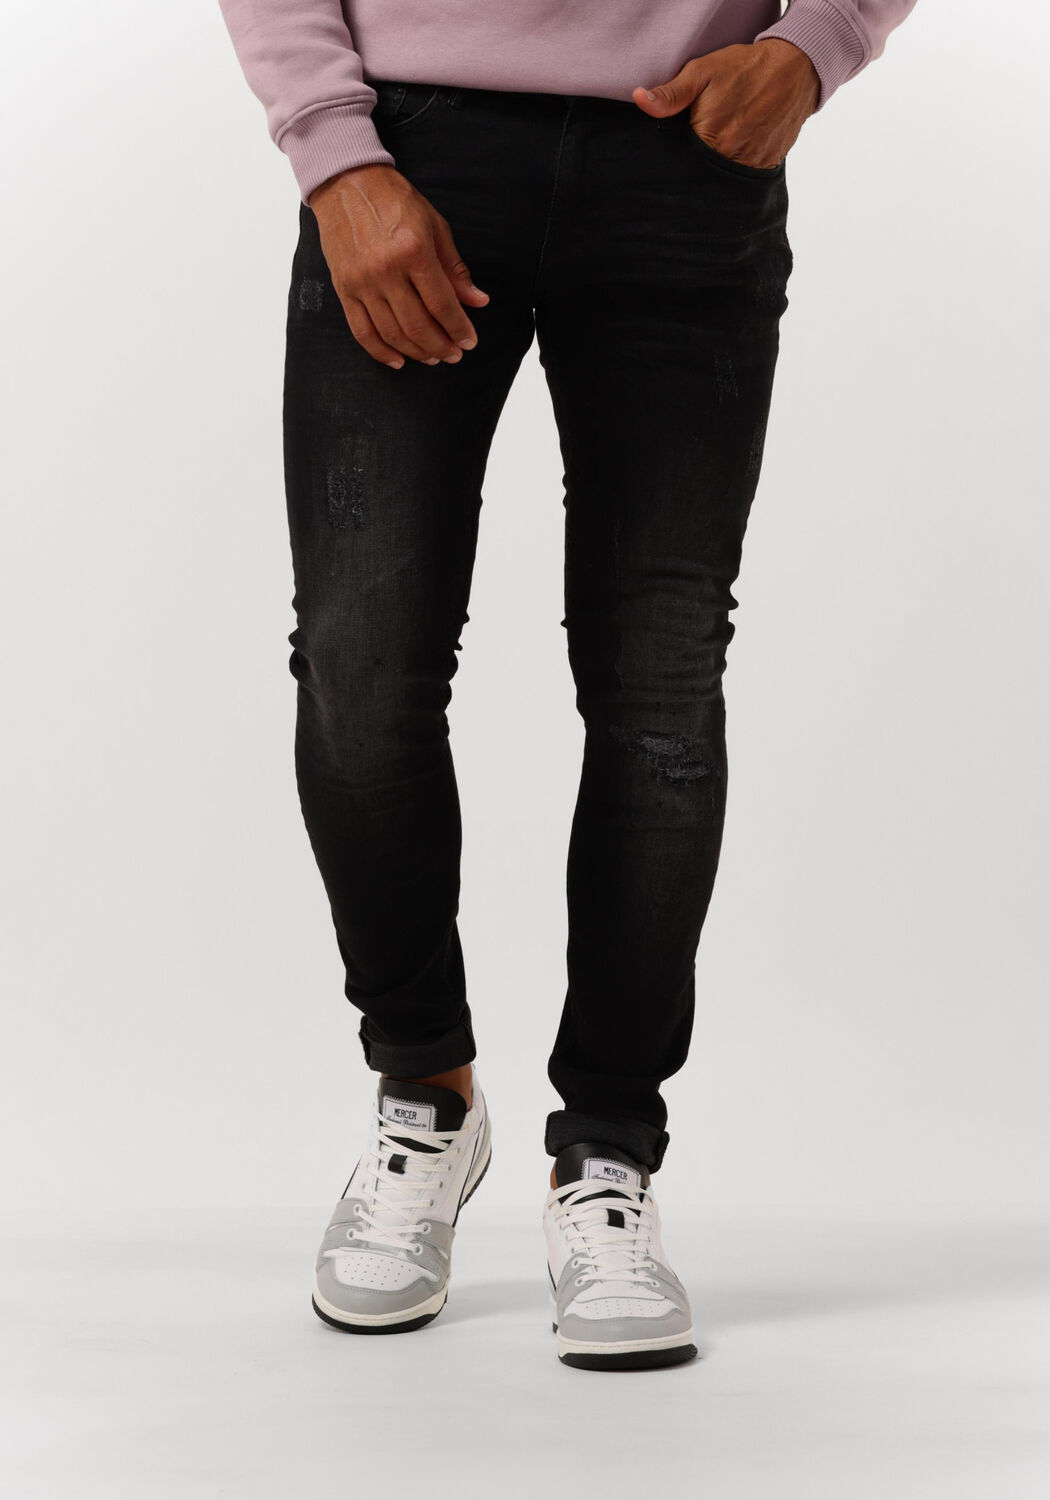 Skinny Fit Jeans With Subtle Damaging Spots And Paint SplAshes Homme Slim Fit Jeans #the Jone Omoda Homme Vêtements Pantalons & Jeans Jeans Skinny 